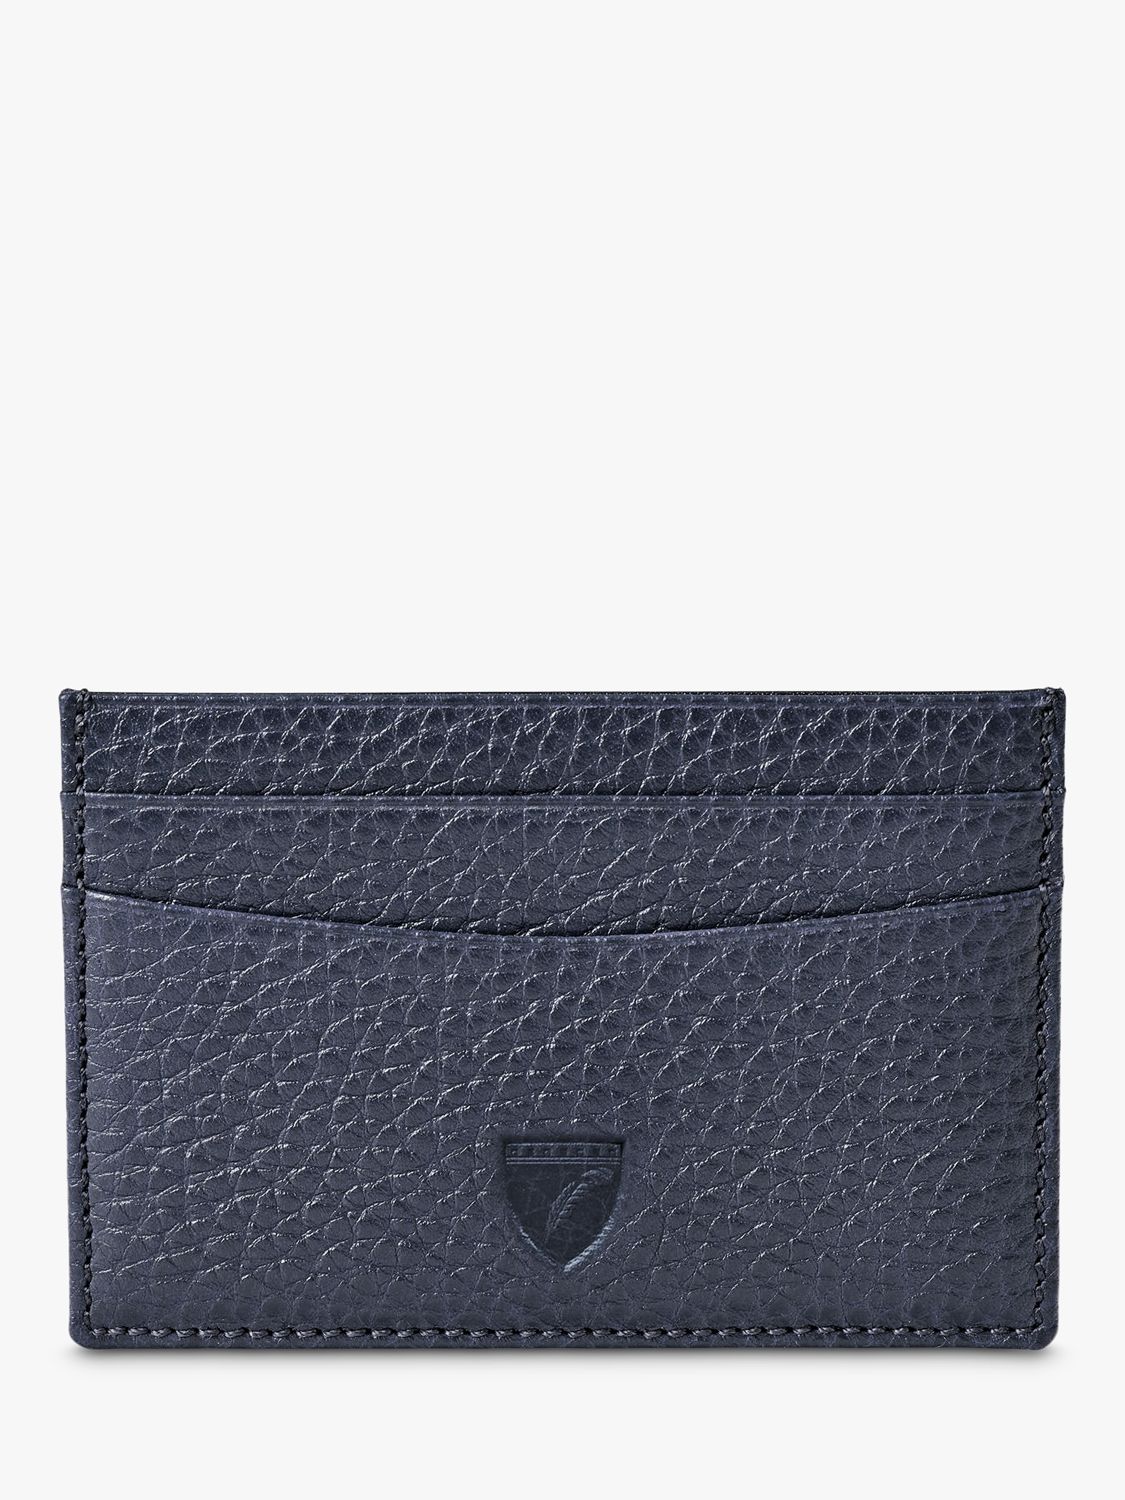 Aspinal of London Pebble Leather Slim Credit Card Case, Navy